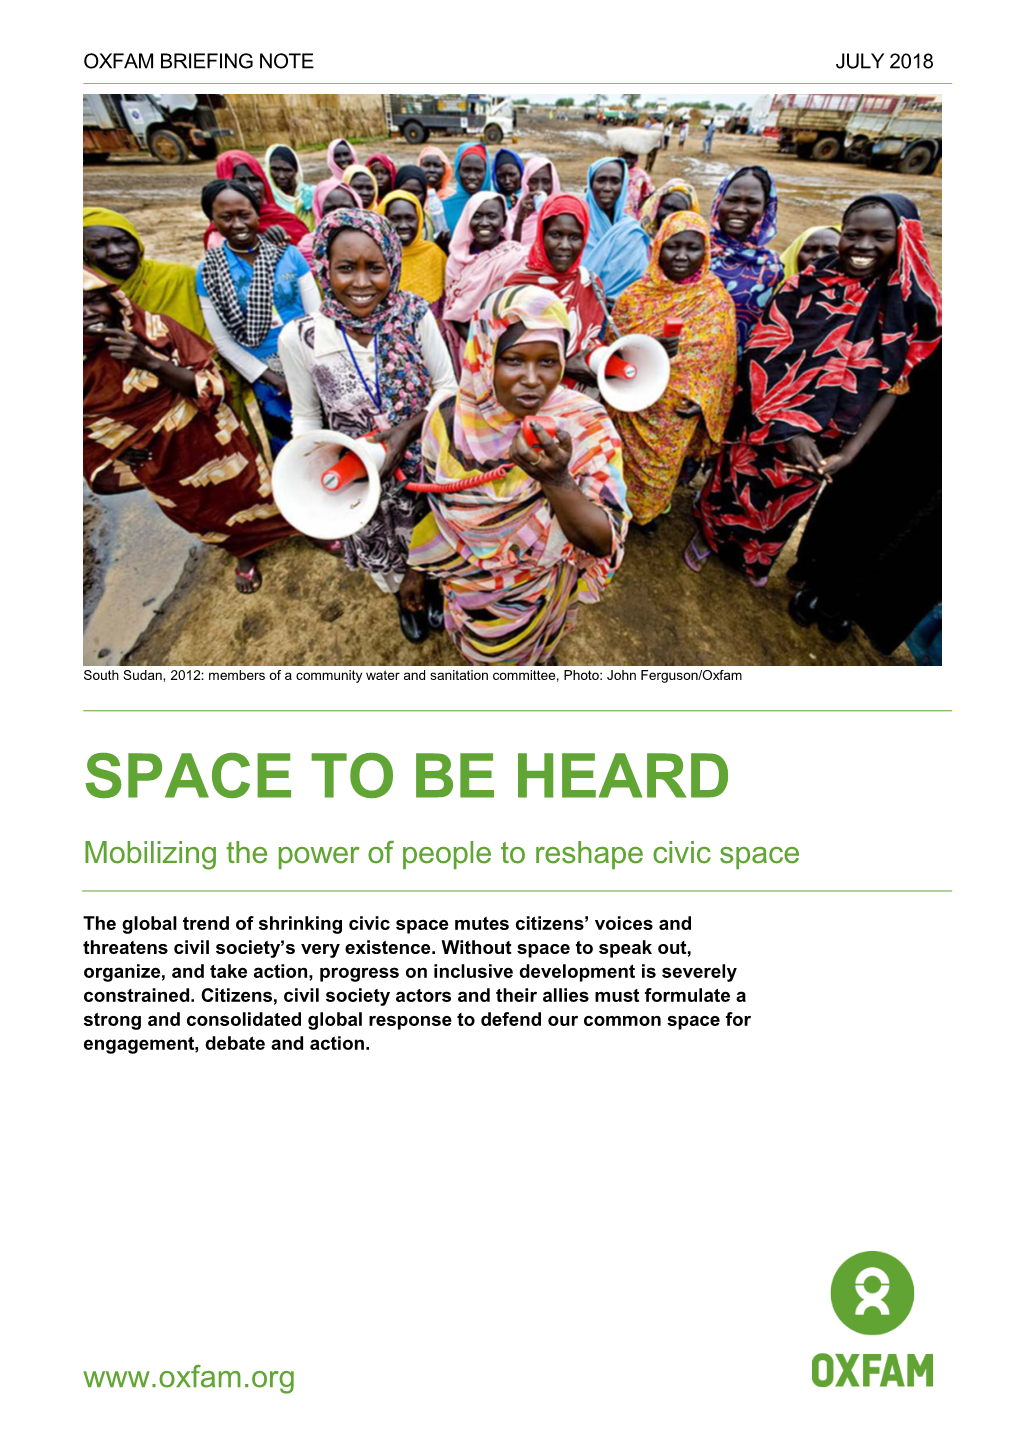 SPACE to BE HEARD Mobilizing the Power of People to Reshape Civic Space